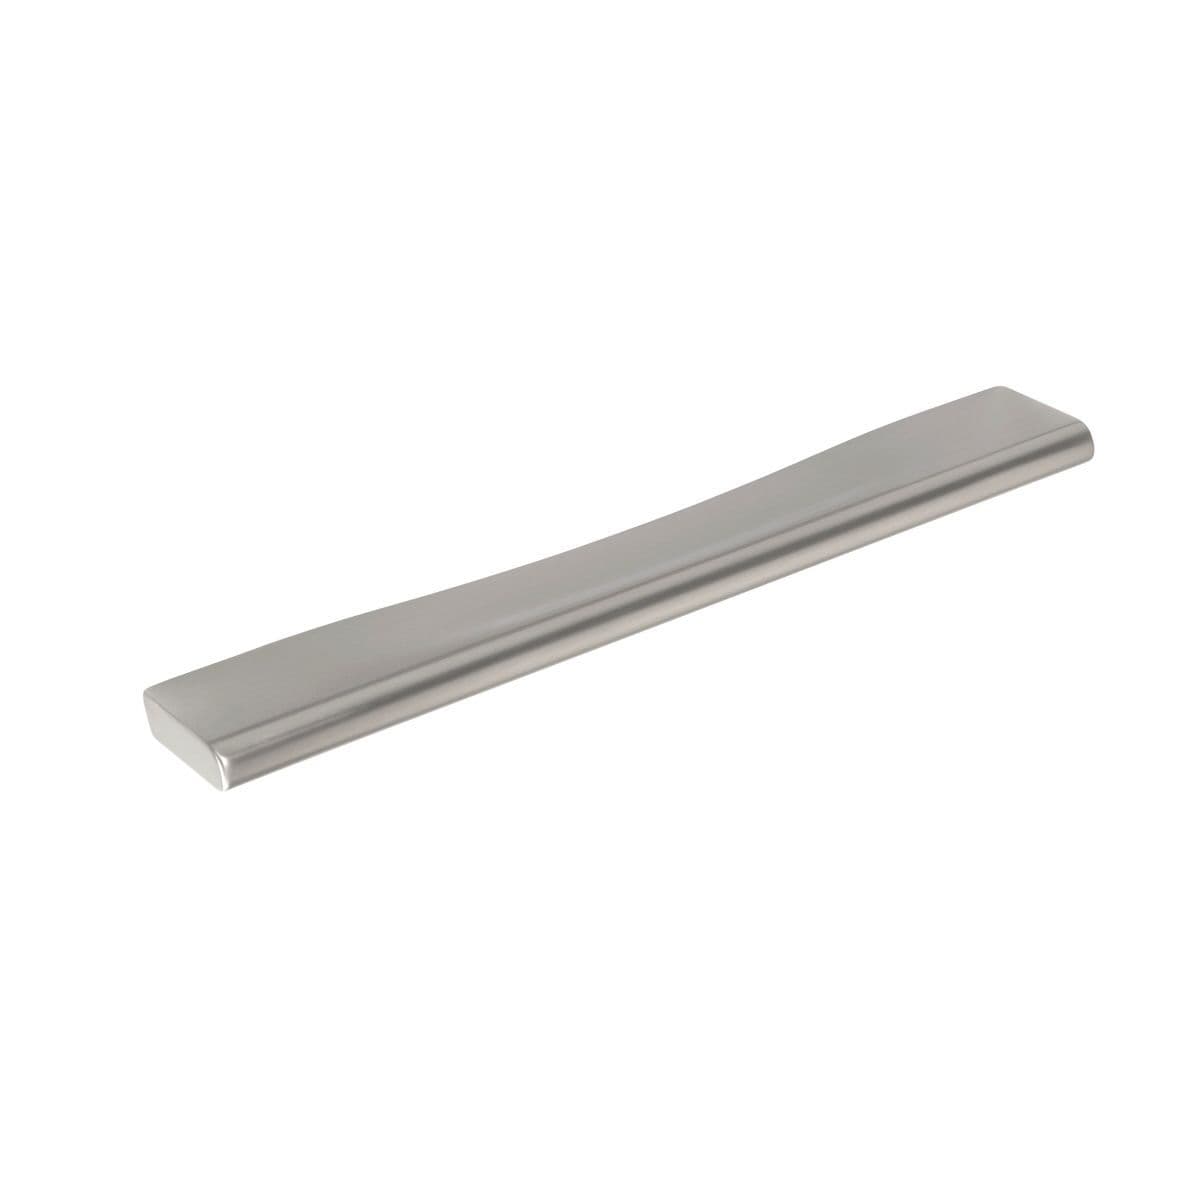 CHEADLE BLOCK PULL Cupboard Handle - 2 sizes - BRUSHED S/STEEL EFFECT finish (PWS KDH3000/3001)